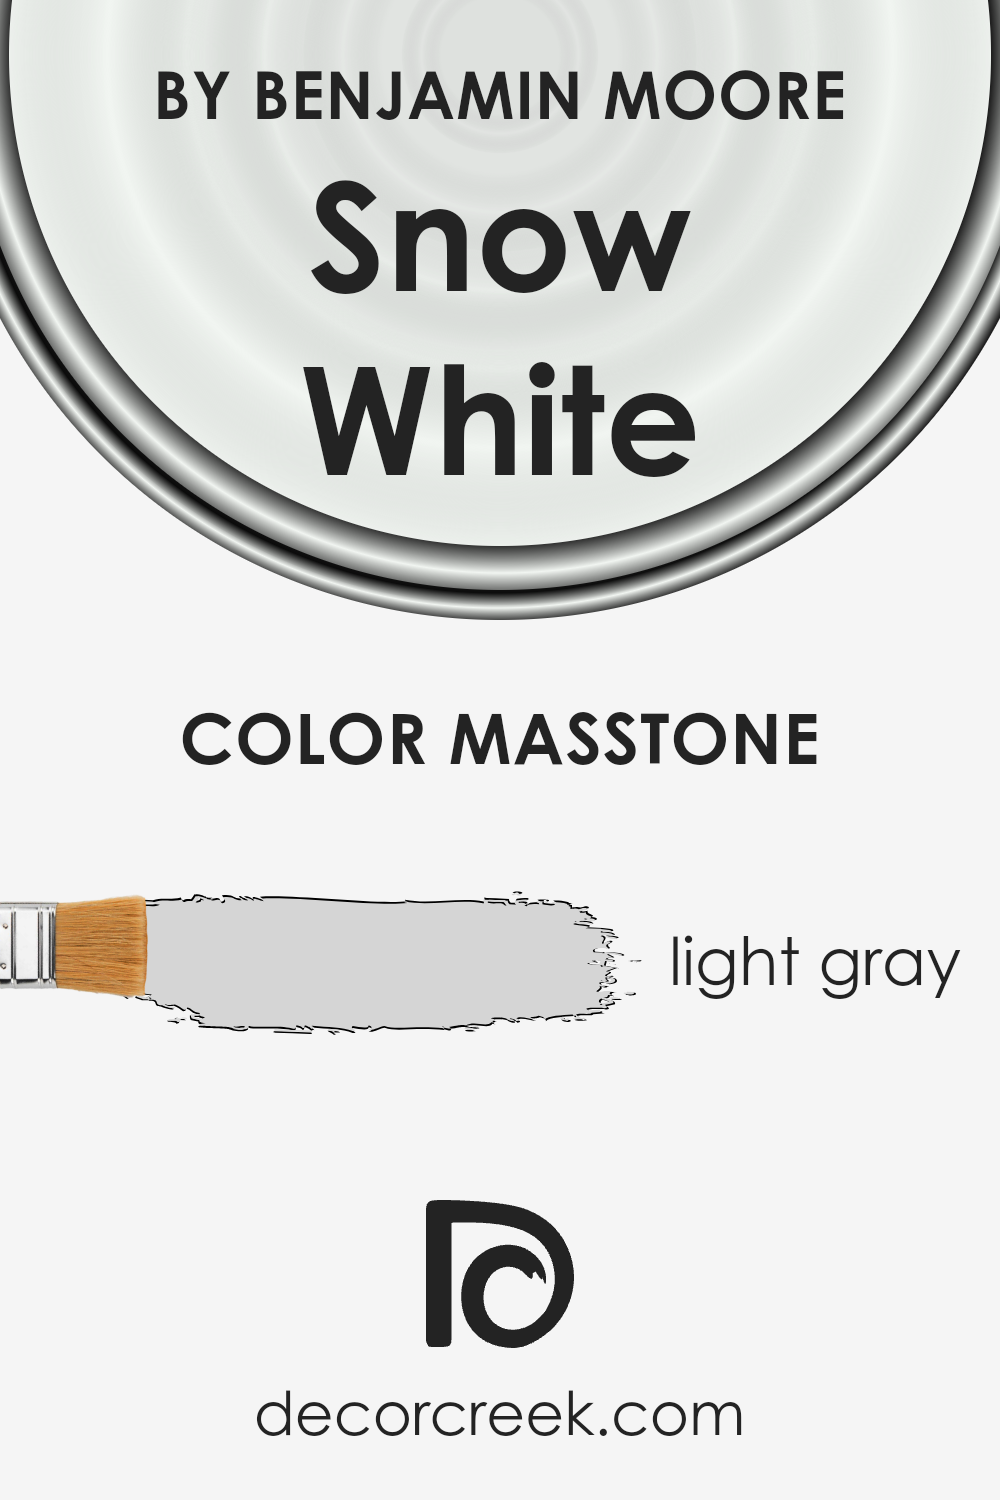 what_is_the_masstone_of_snow_white_oc_66